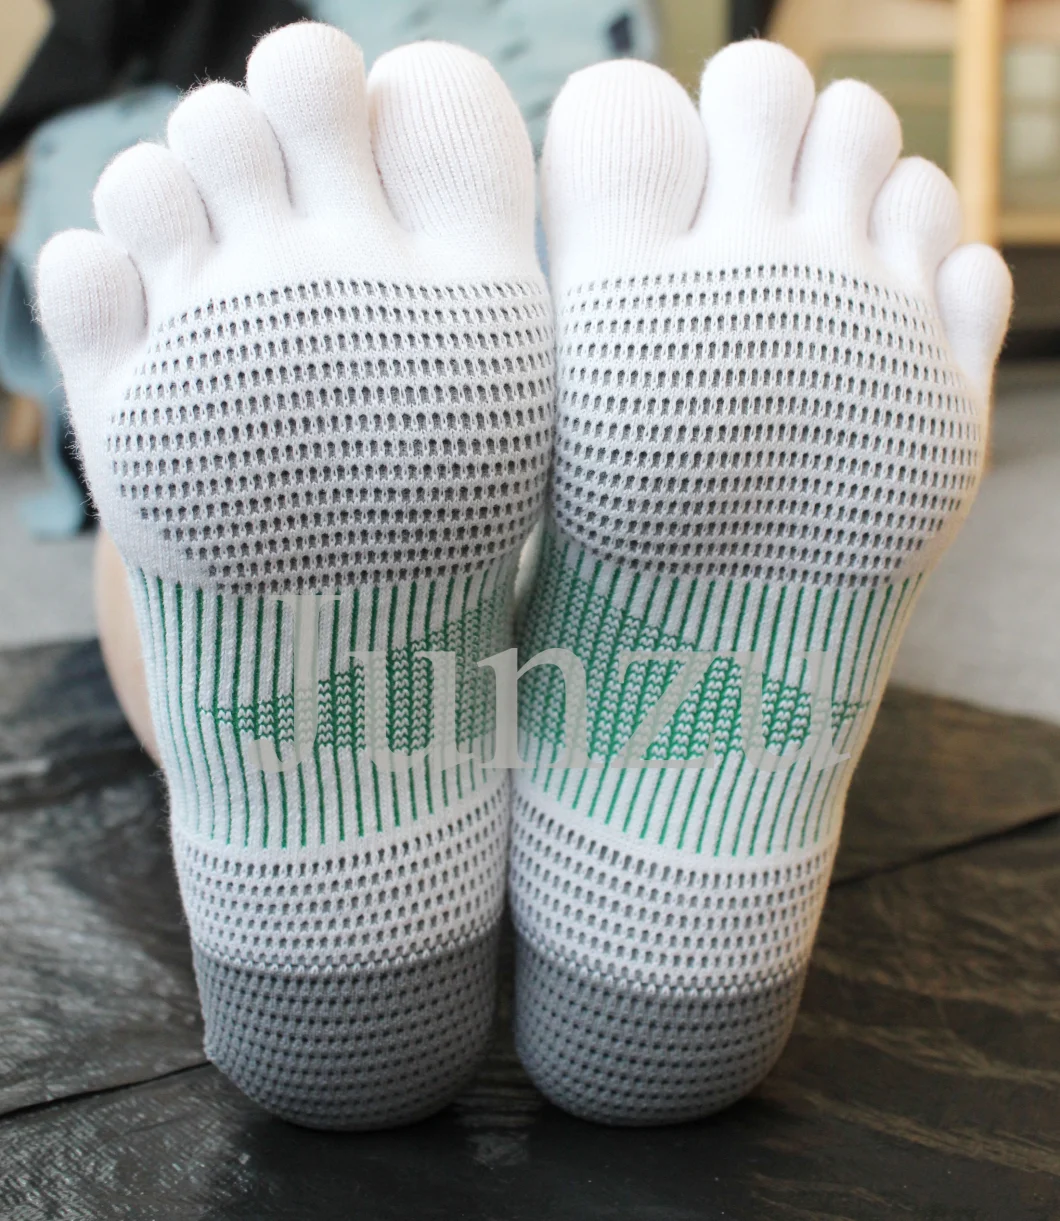 Five Fingers Socks Best Quality Toe Socks with Competitive Price